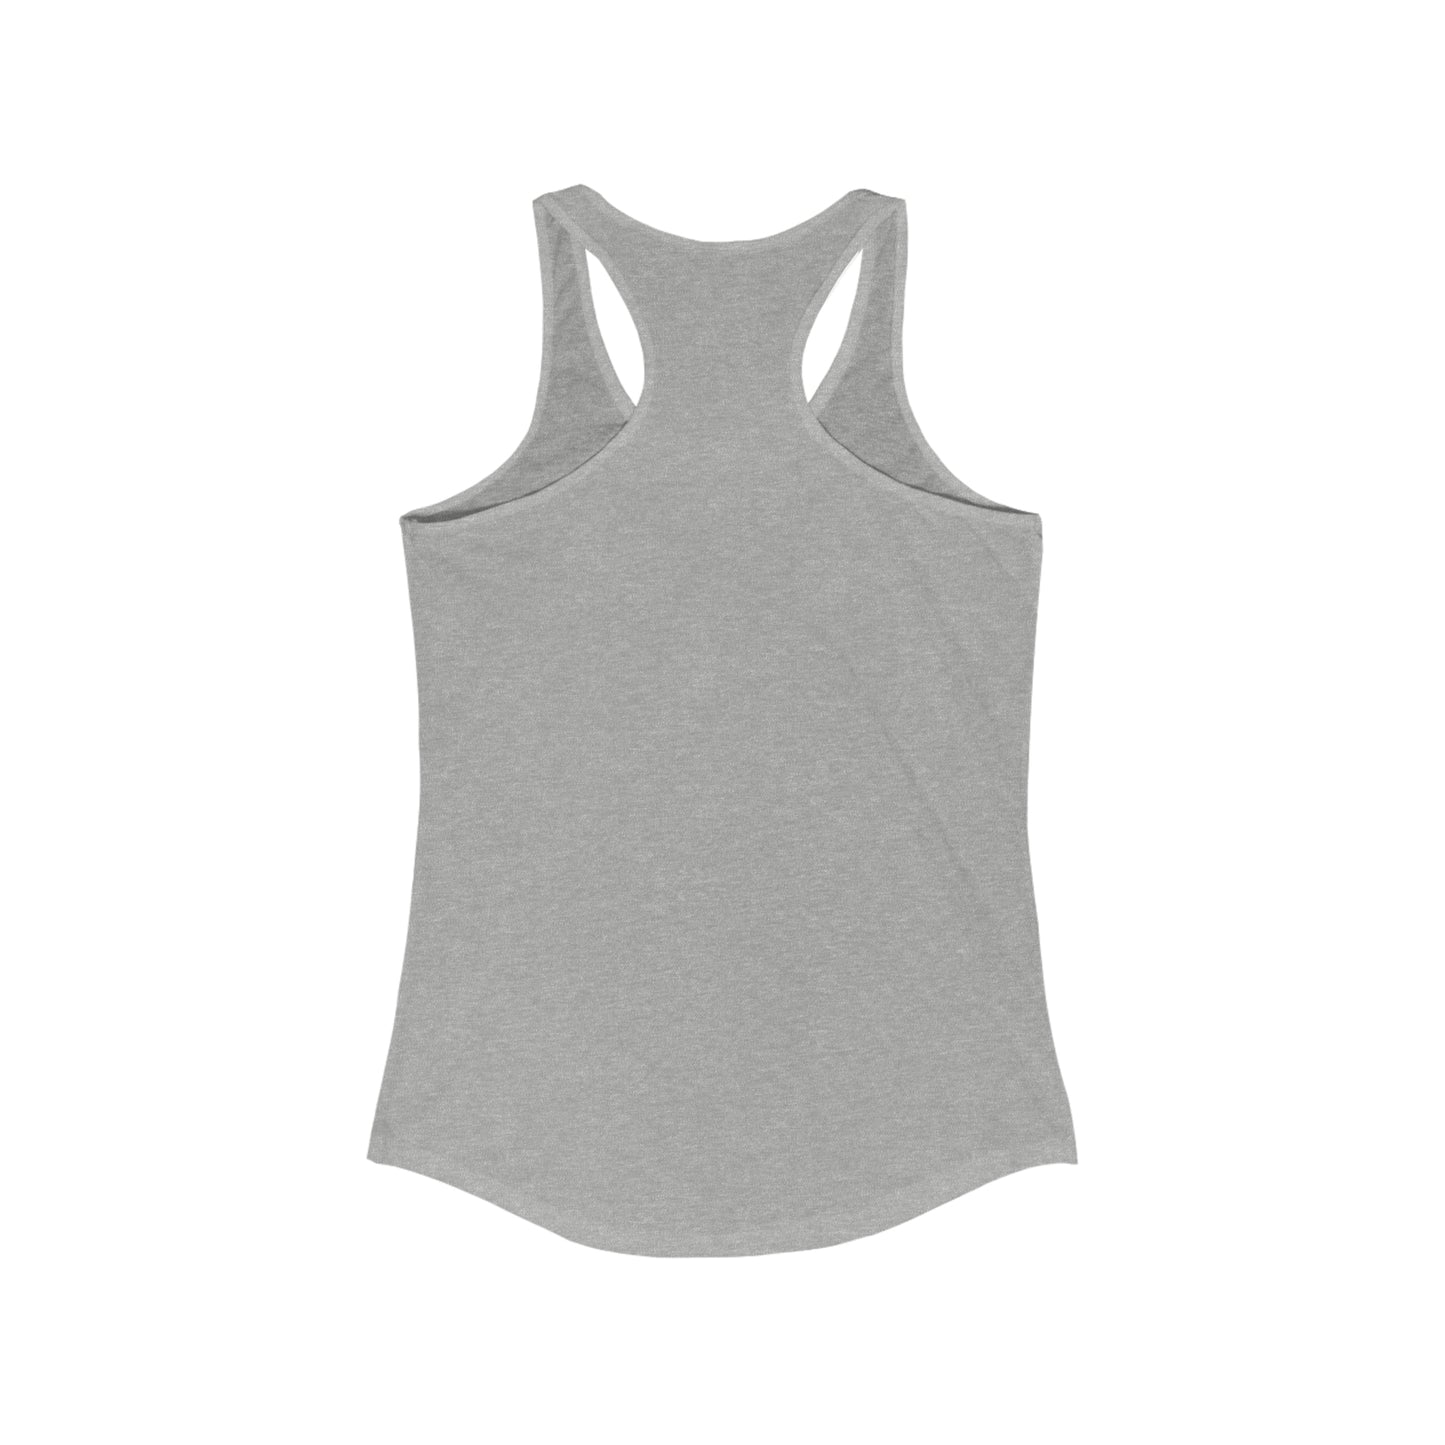 Indian Relay / Saddle Butte Sisters Women's Ideal Racerback Tank